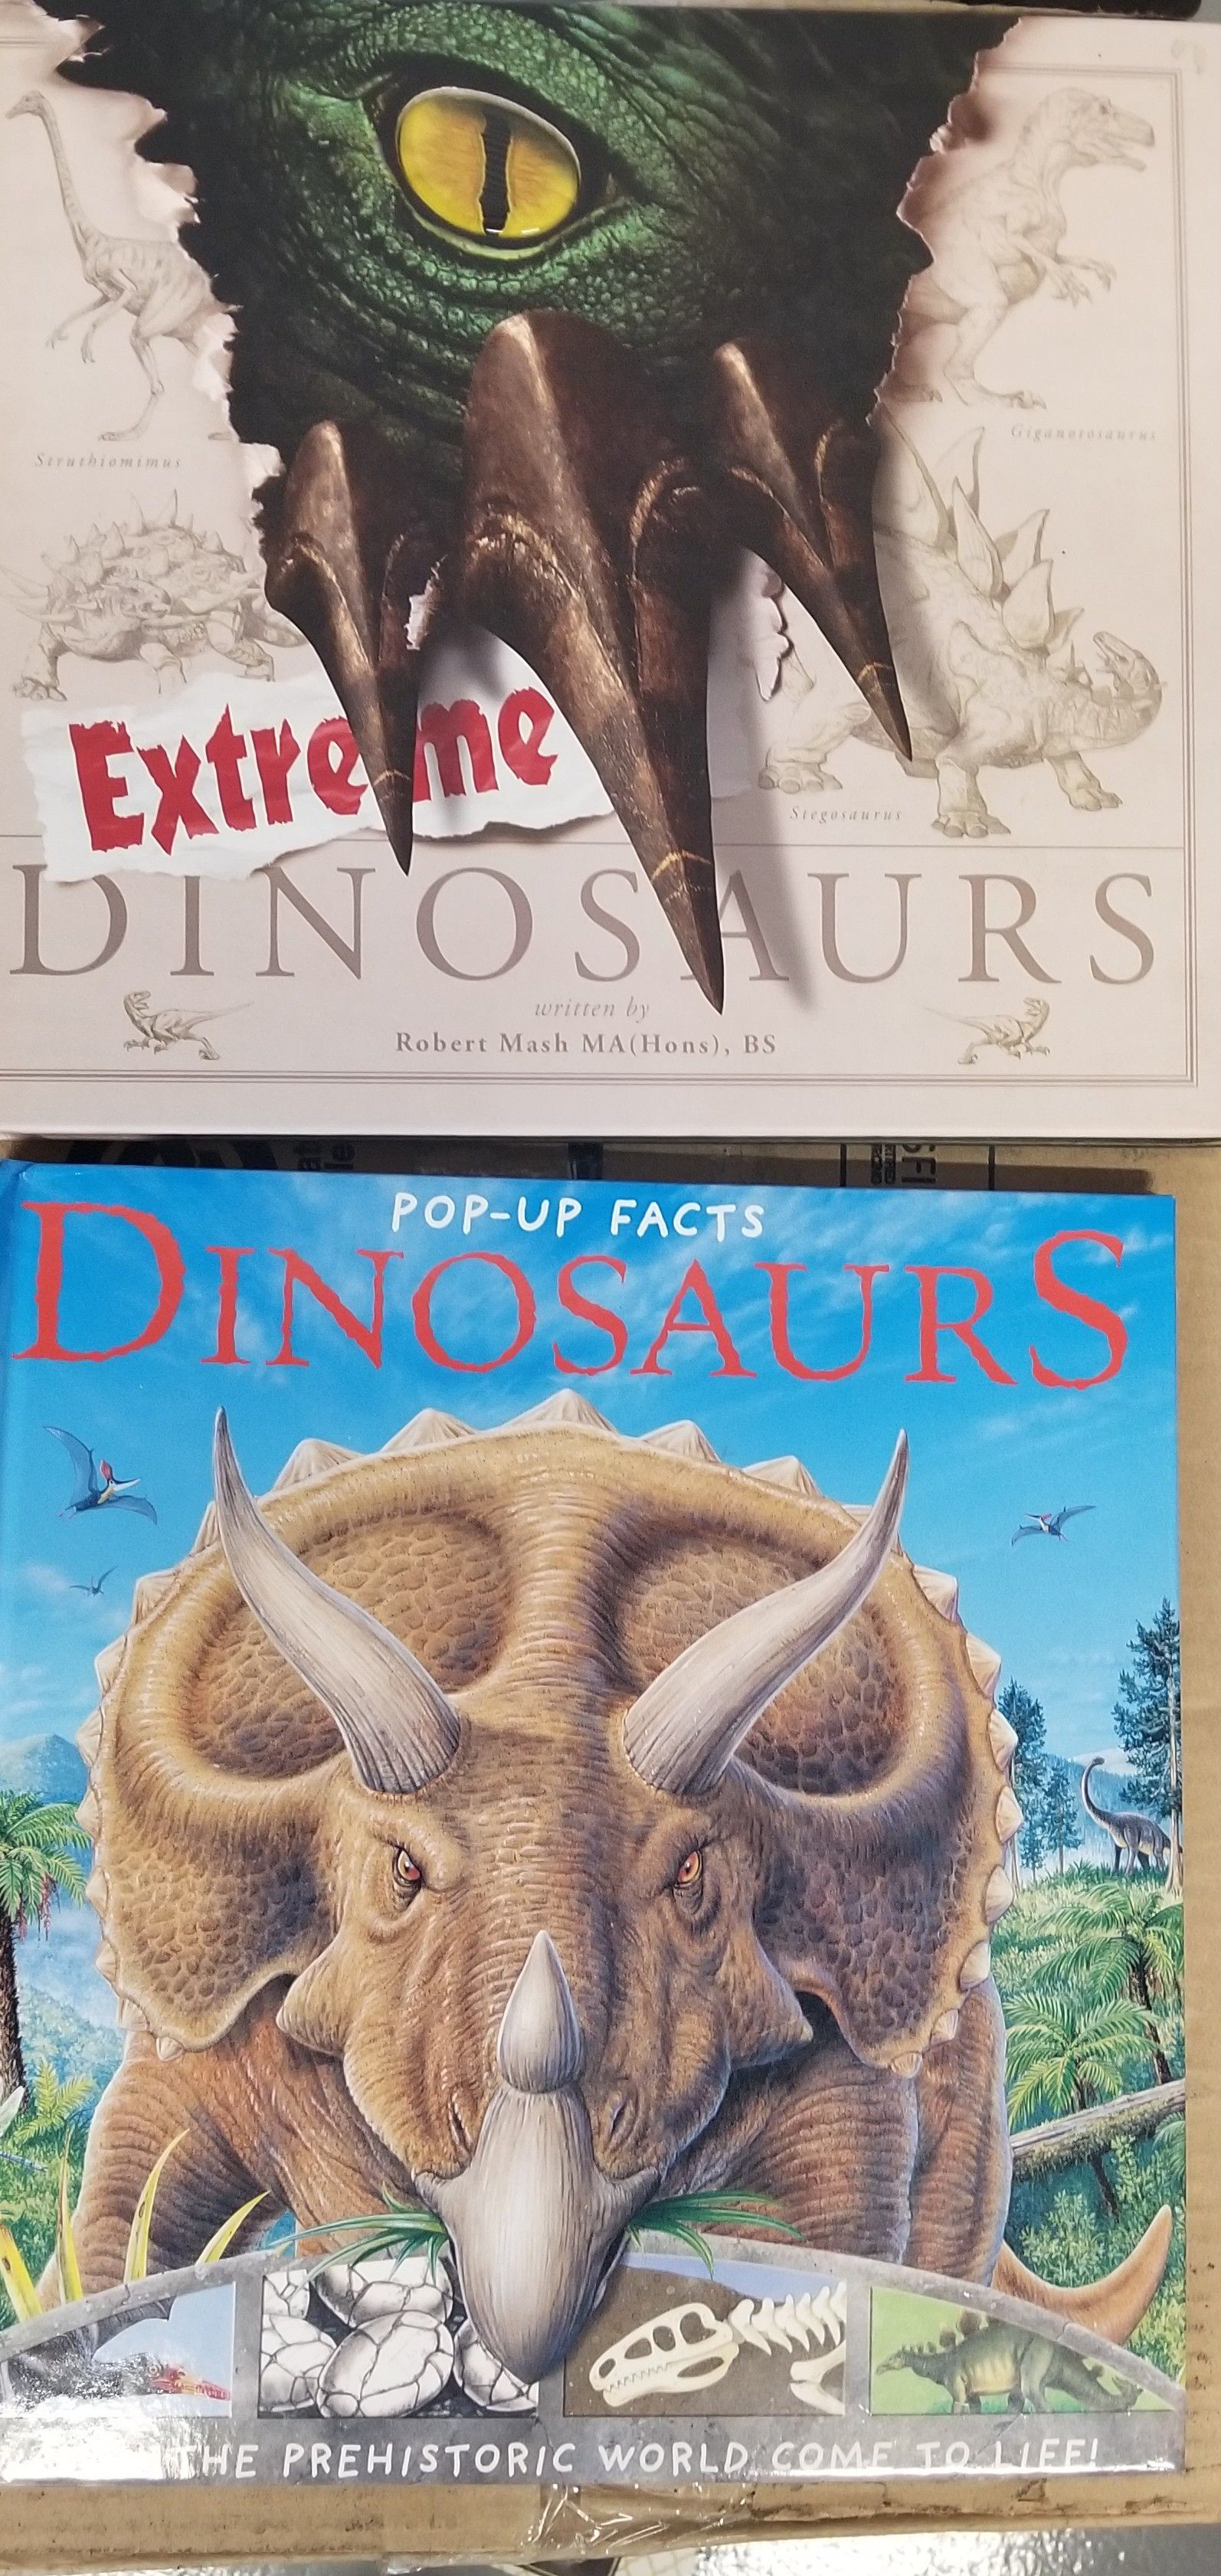 Dinosaurs and Extreme Dinosaurs books